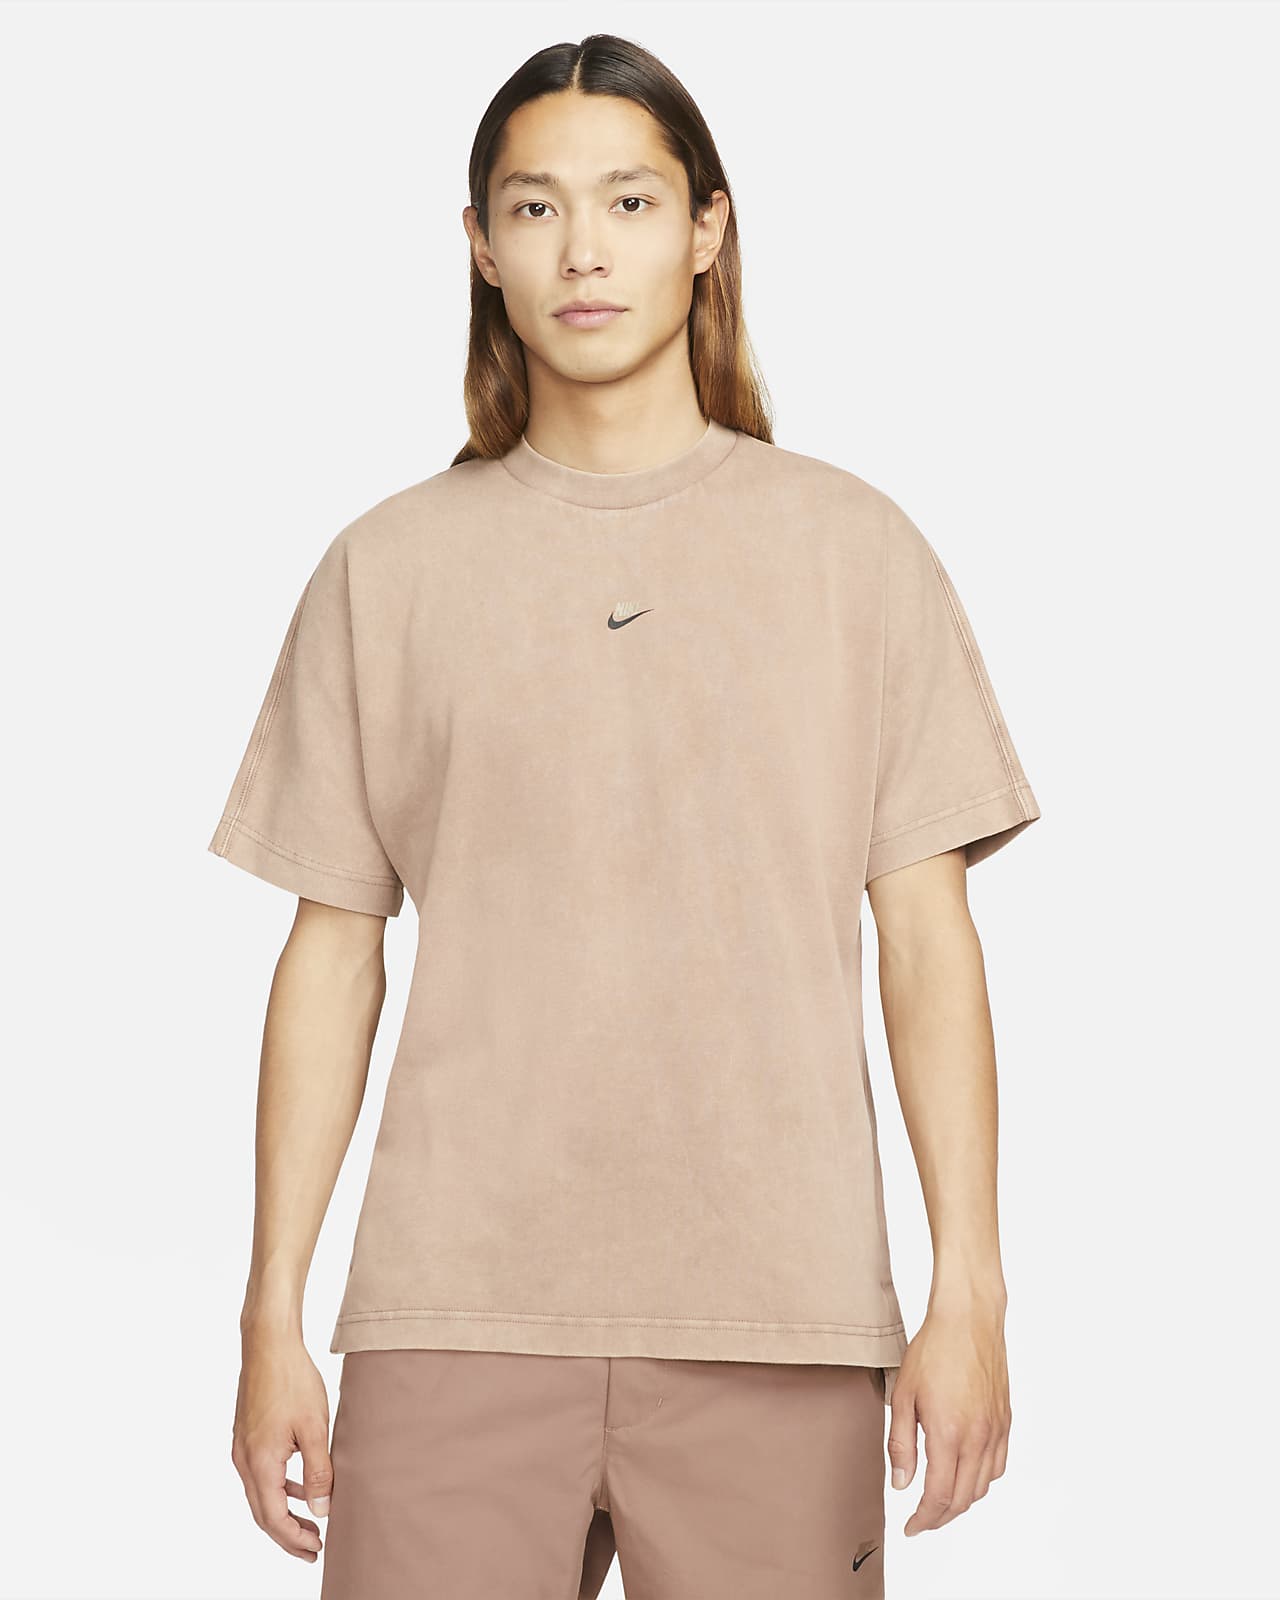 Nike Sportswear Style Essentials Men's Washed Short-Sleeve Top